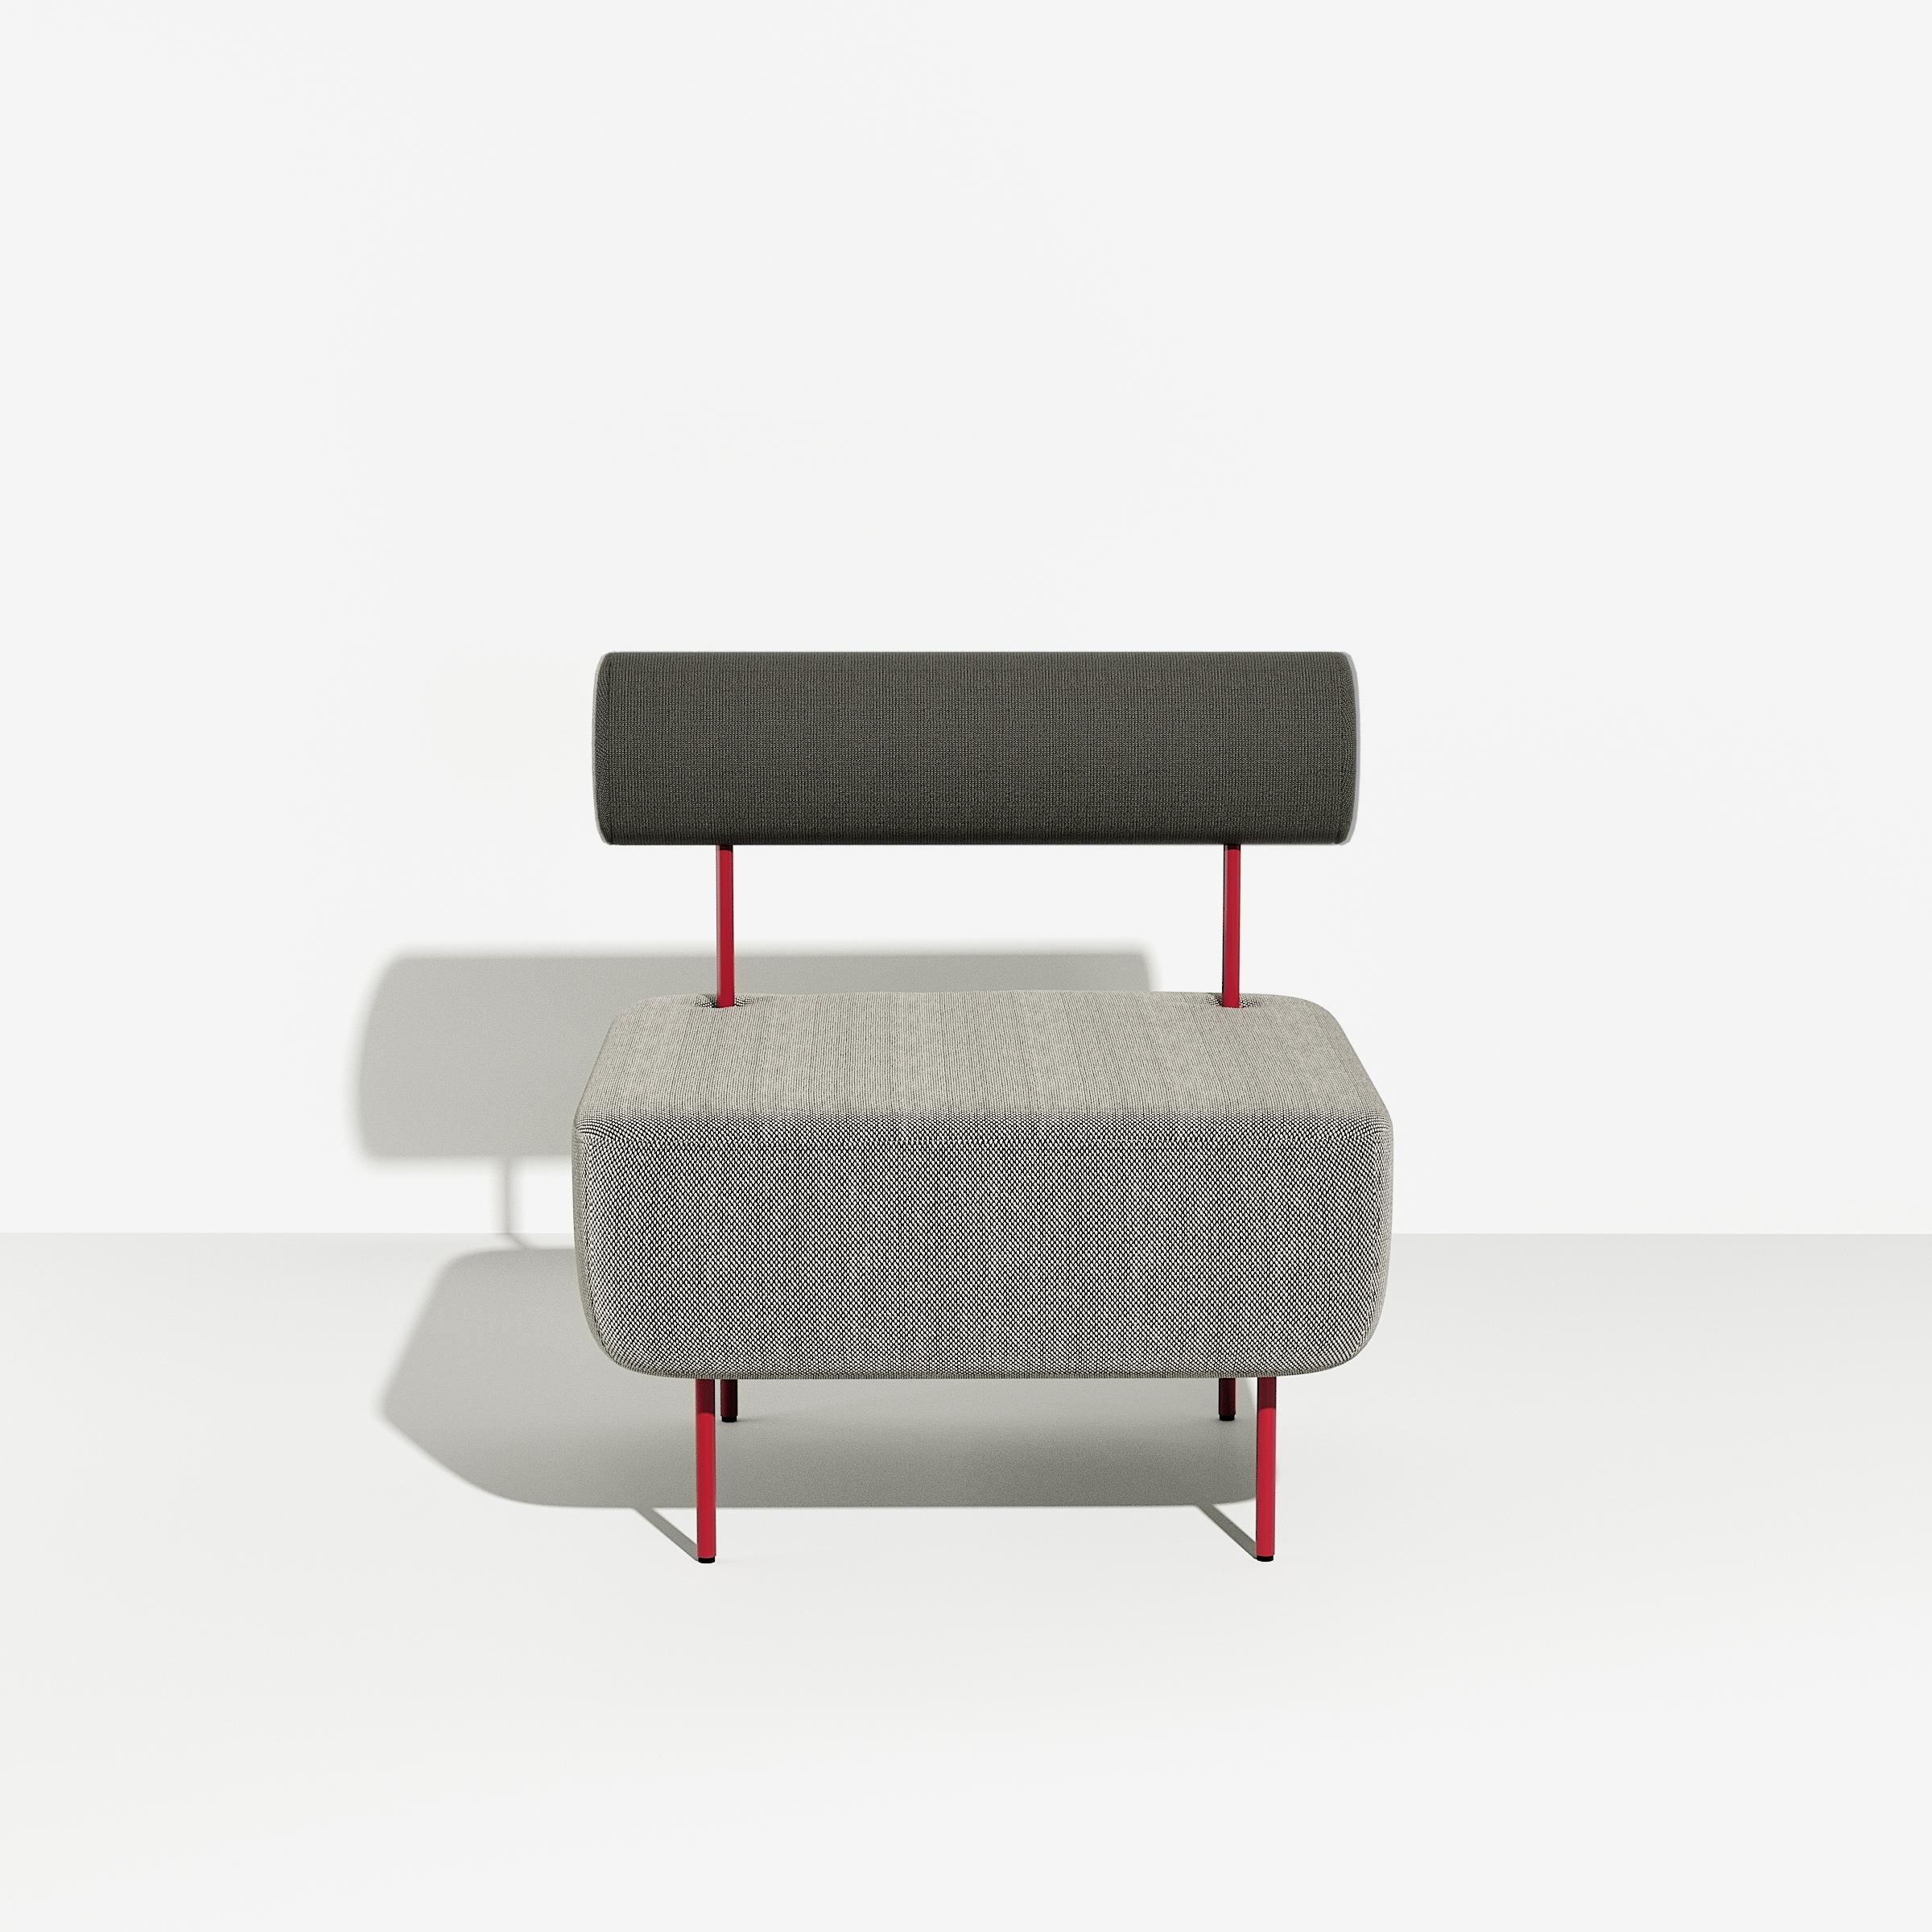 Petite Friture Medium Hoff Armchair in Grey-black by Morten & Jonas, 2015

Hoff created by designer duo Morten & Jonas is a collection of two modular stools and two modular armchairs. they can combine to make a sofa as well an entire living room